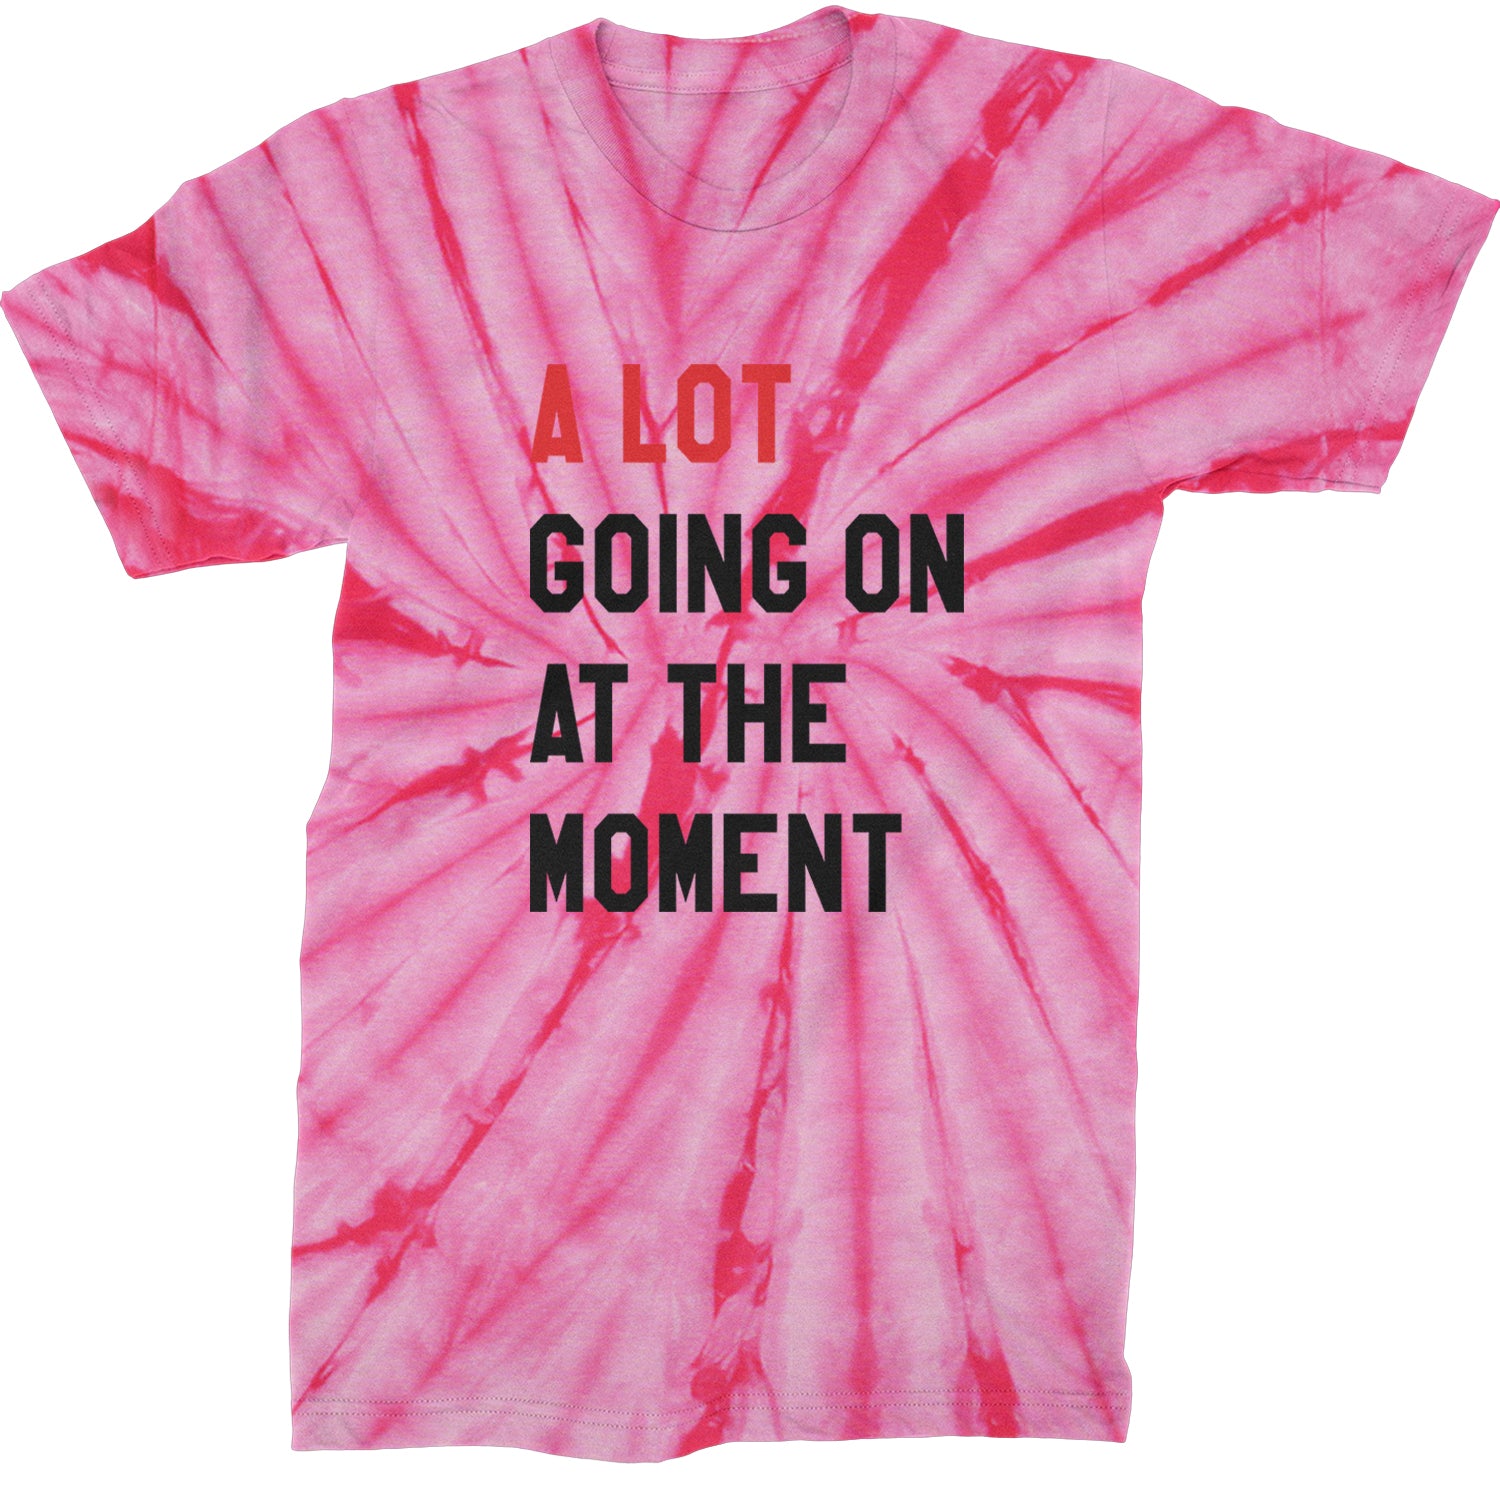 A Lot Going On At The Moment New TTPD Poet Department Mens T-shirt Tie-Dye Spider Pink